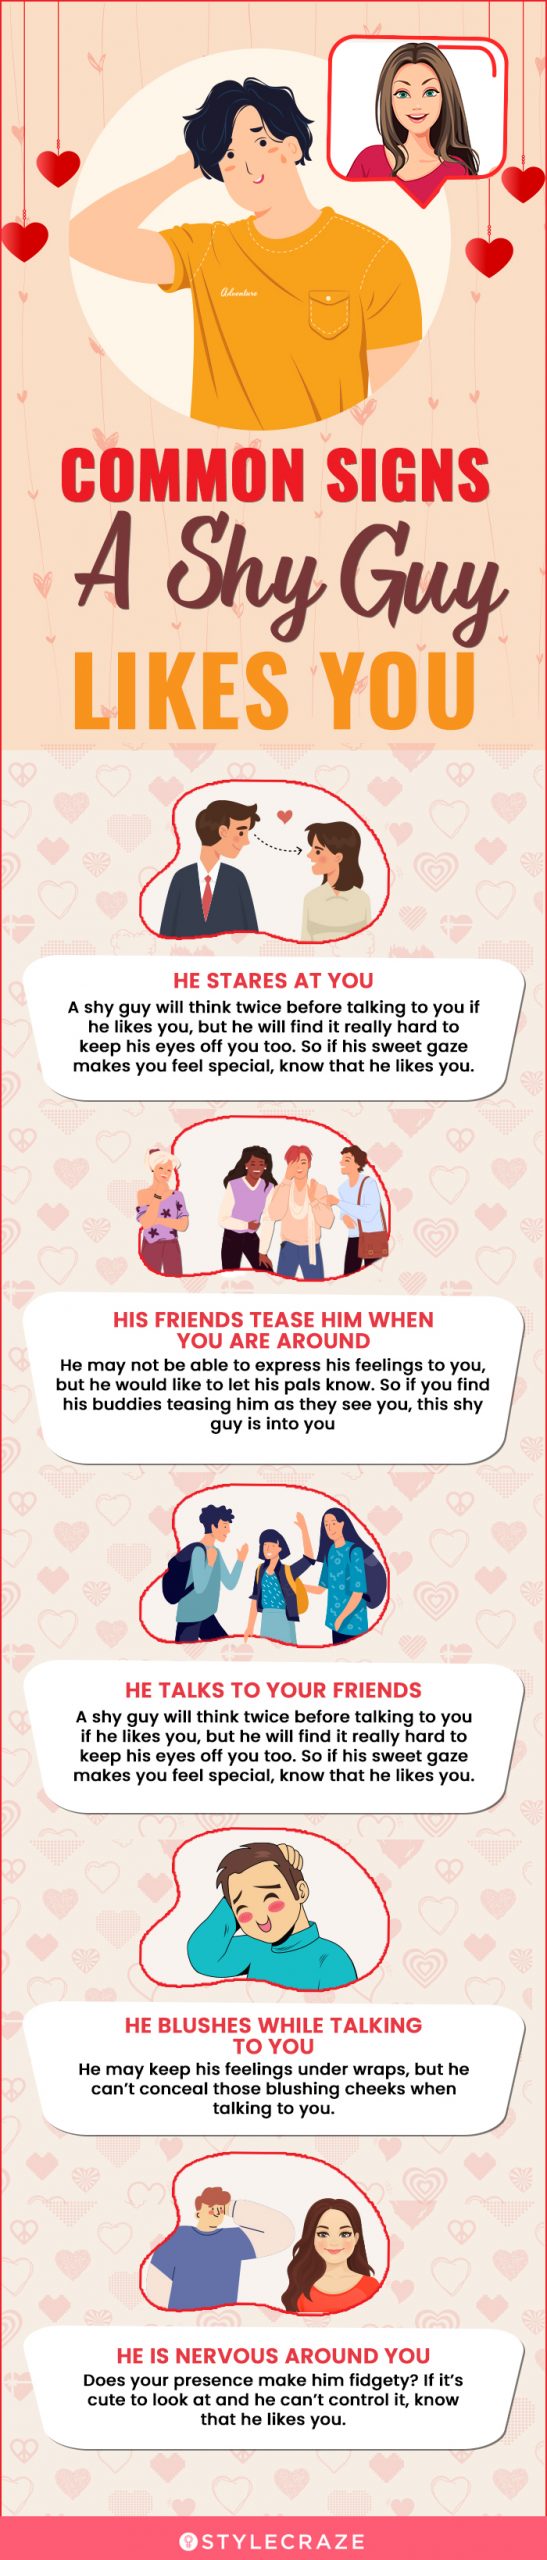 common signs a shy guy likes you [infographic]